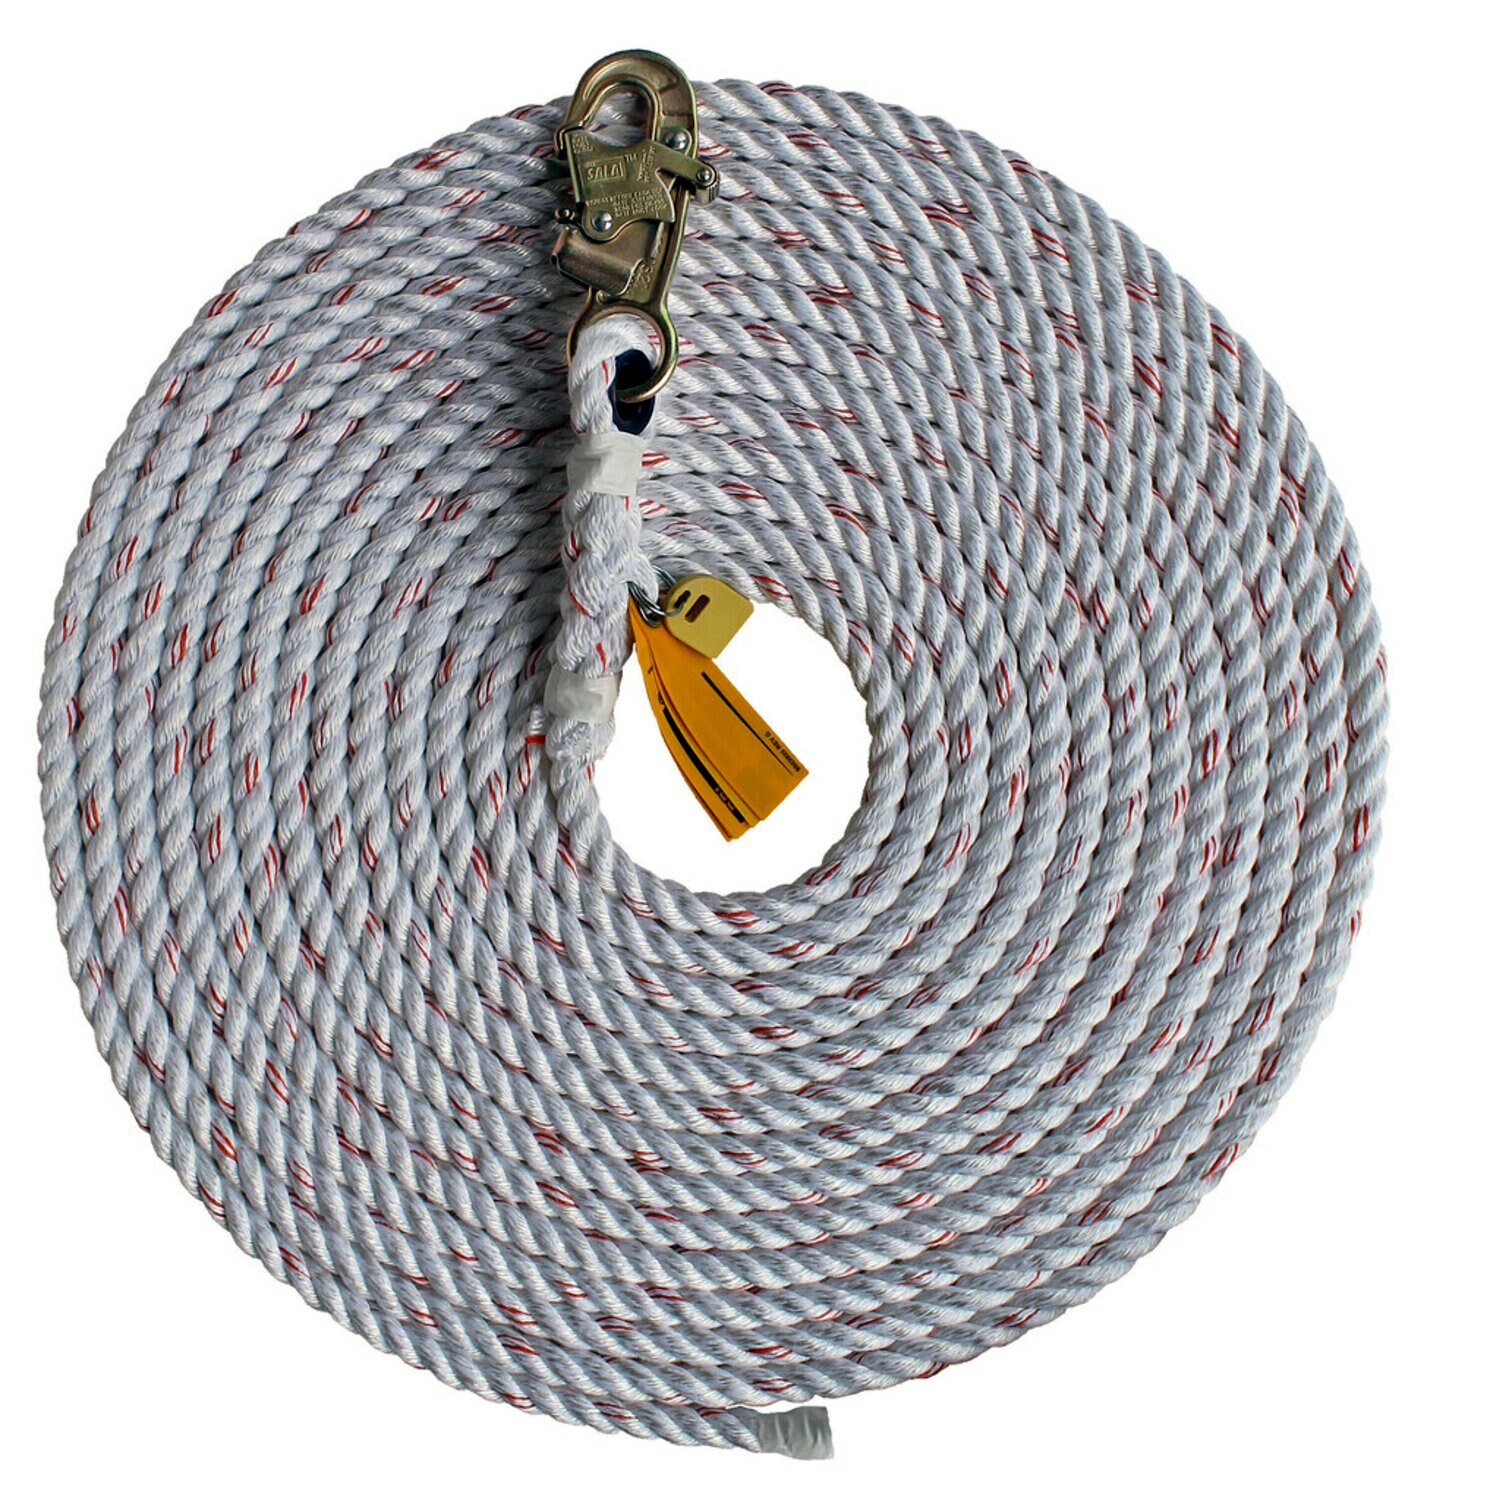 7012336756 - 3M DBI-SALA Rope Lifeline with Snap Hook 1202864, 5/8 in Polyester and Polypropylene Blend, White, 125 ft